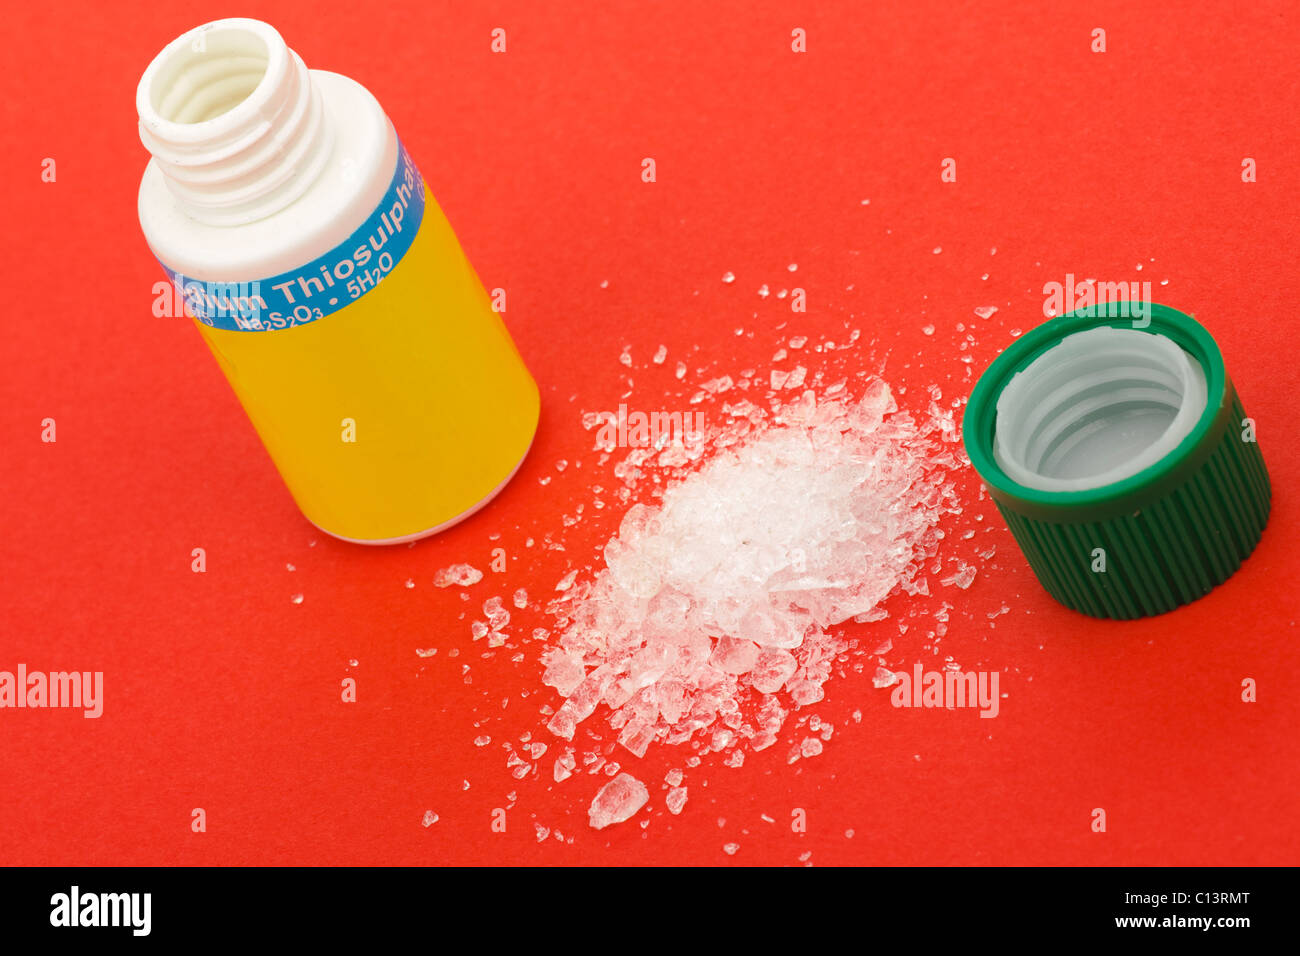 Opened plastic container of Sodium Thiosulphate Stock Photo